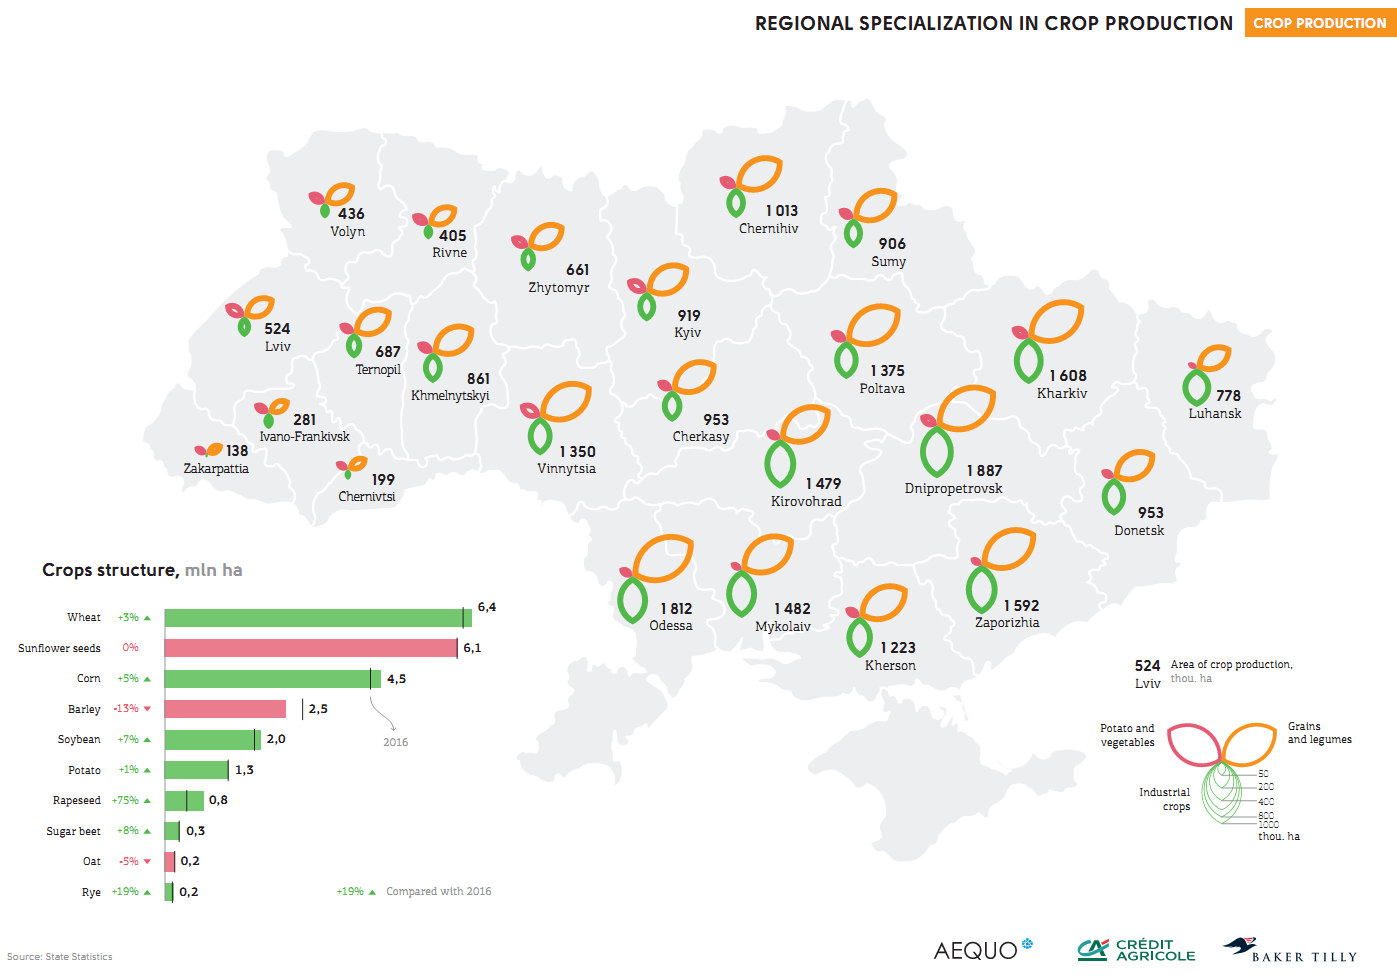 Regional specialization in crop production in Ukraine (click for full resolution)